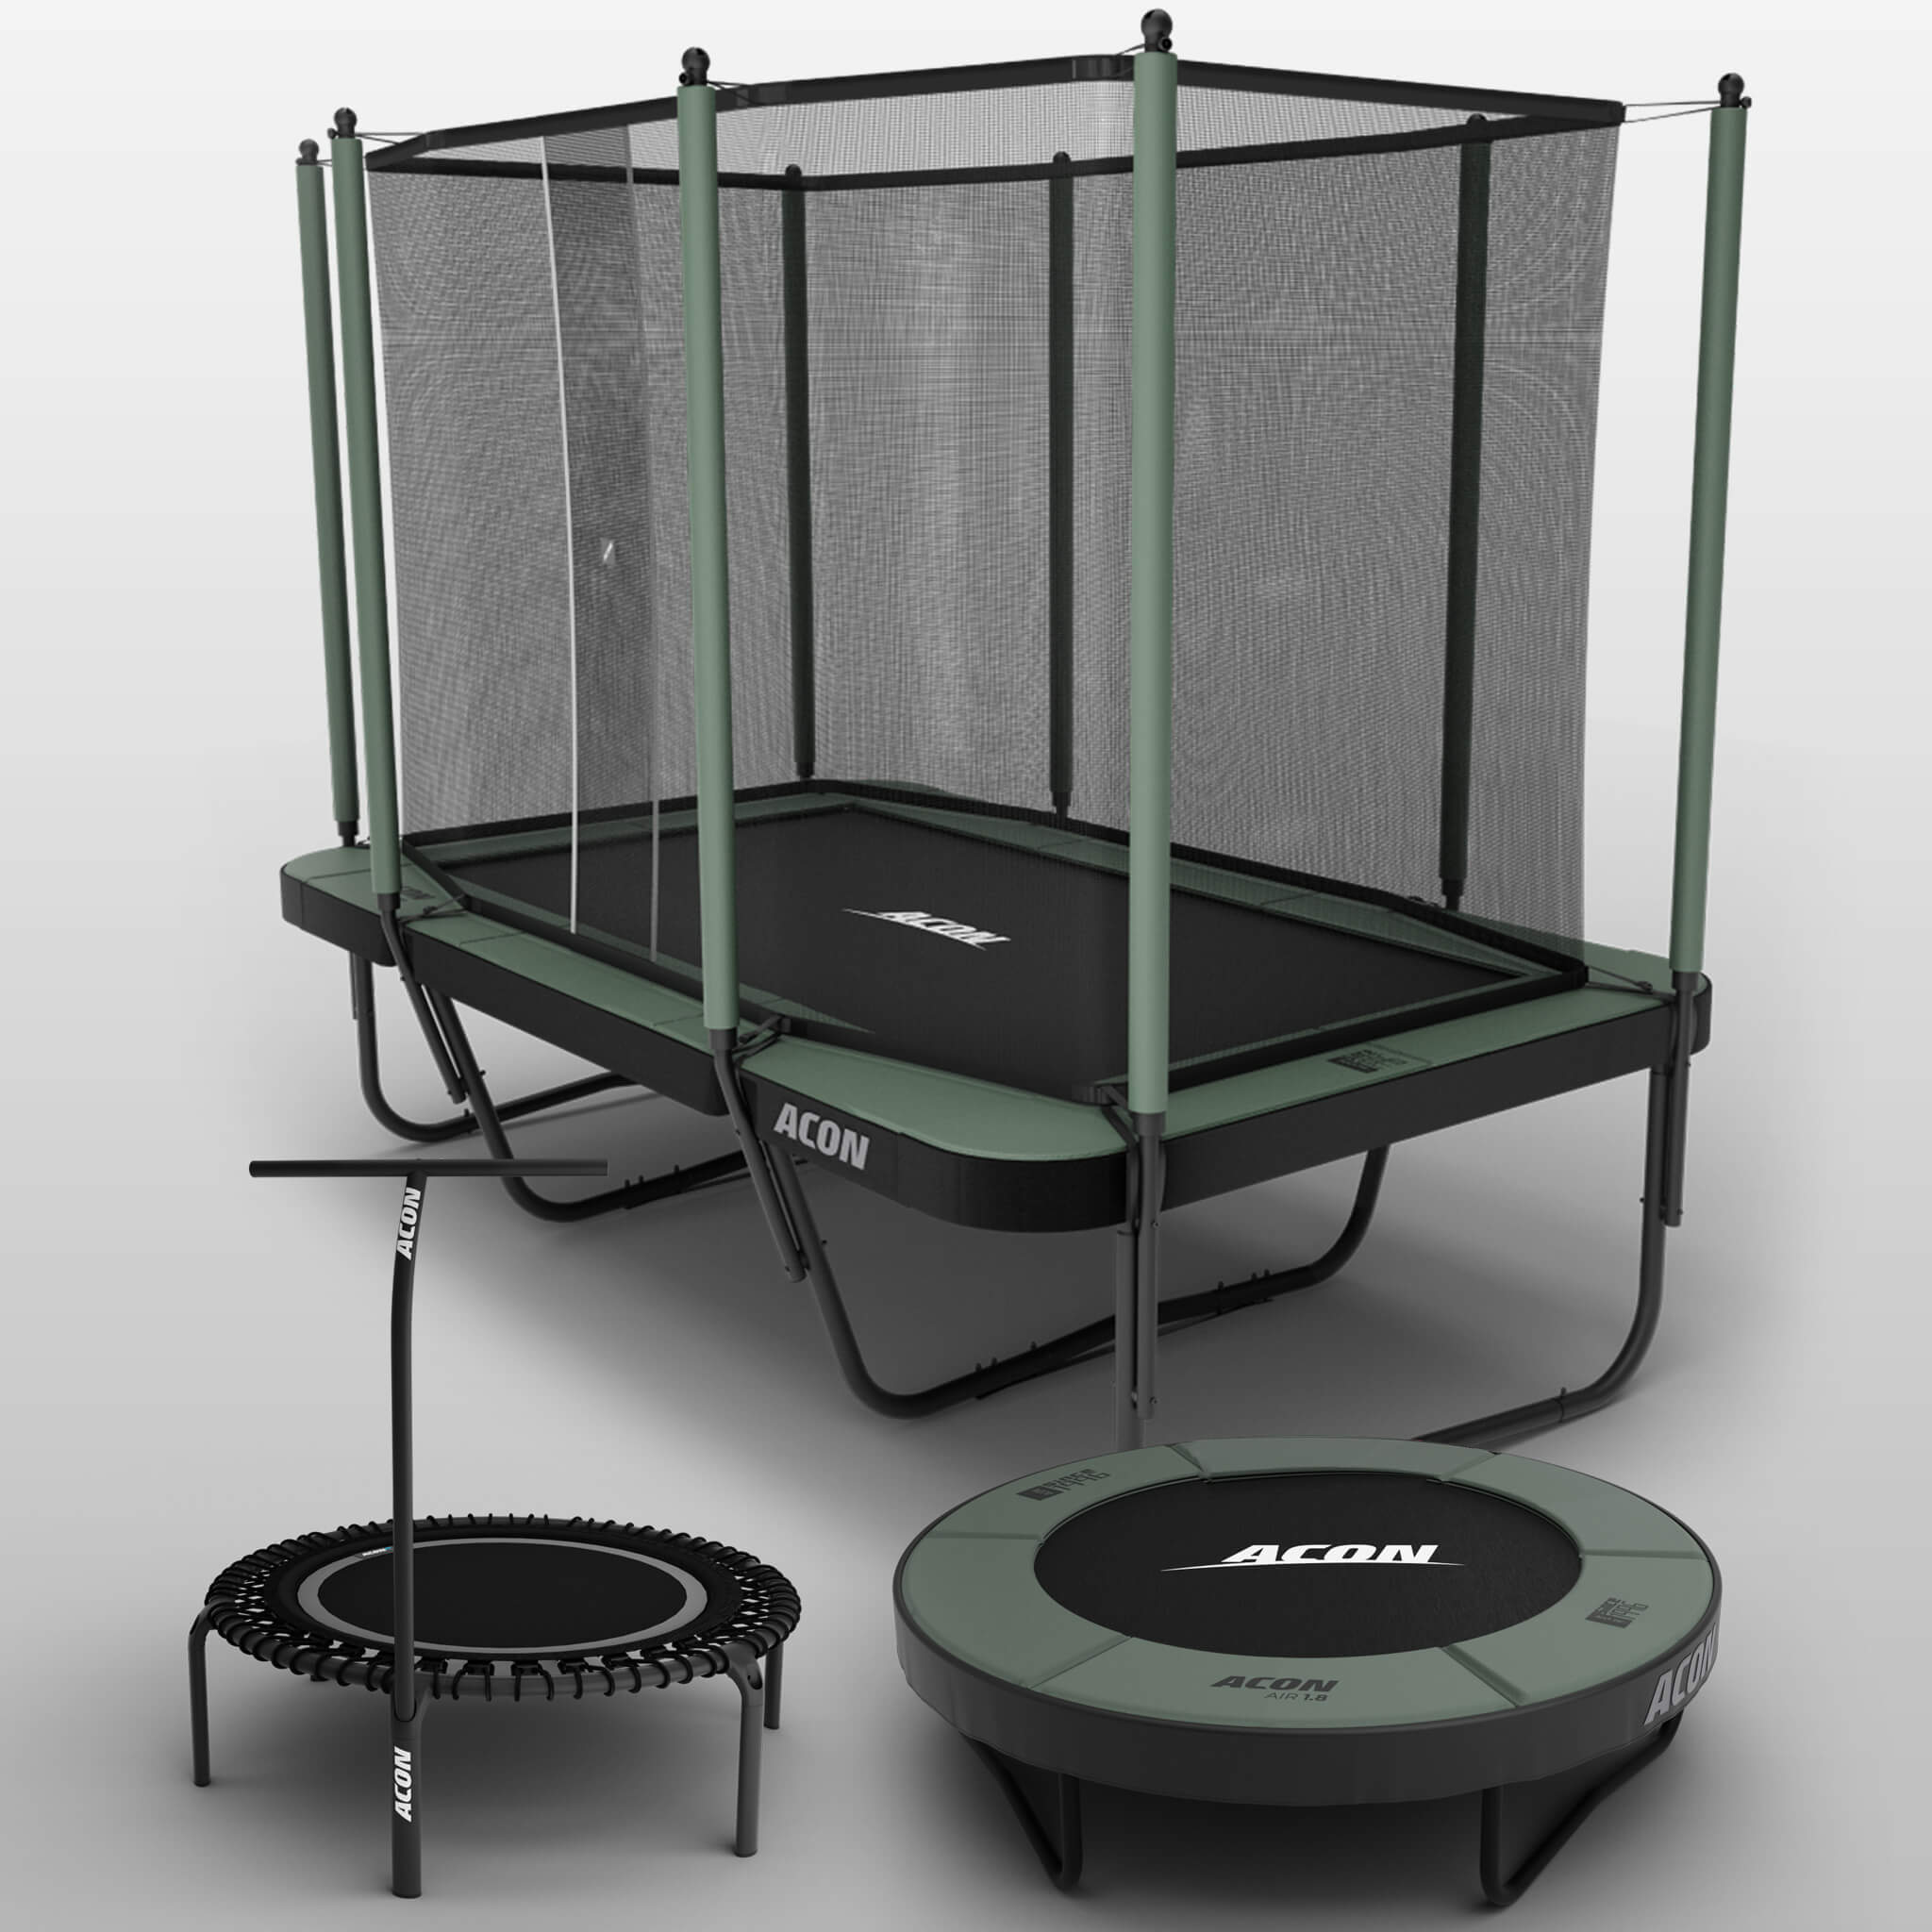 Rectangular trampoline, round mini trampoline and a round rebounder with a handlebar.